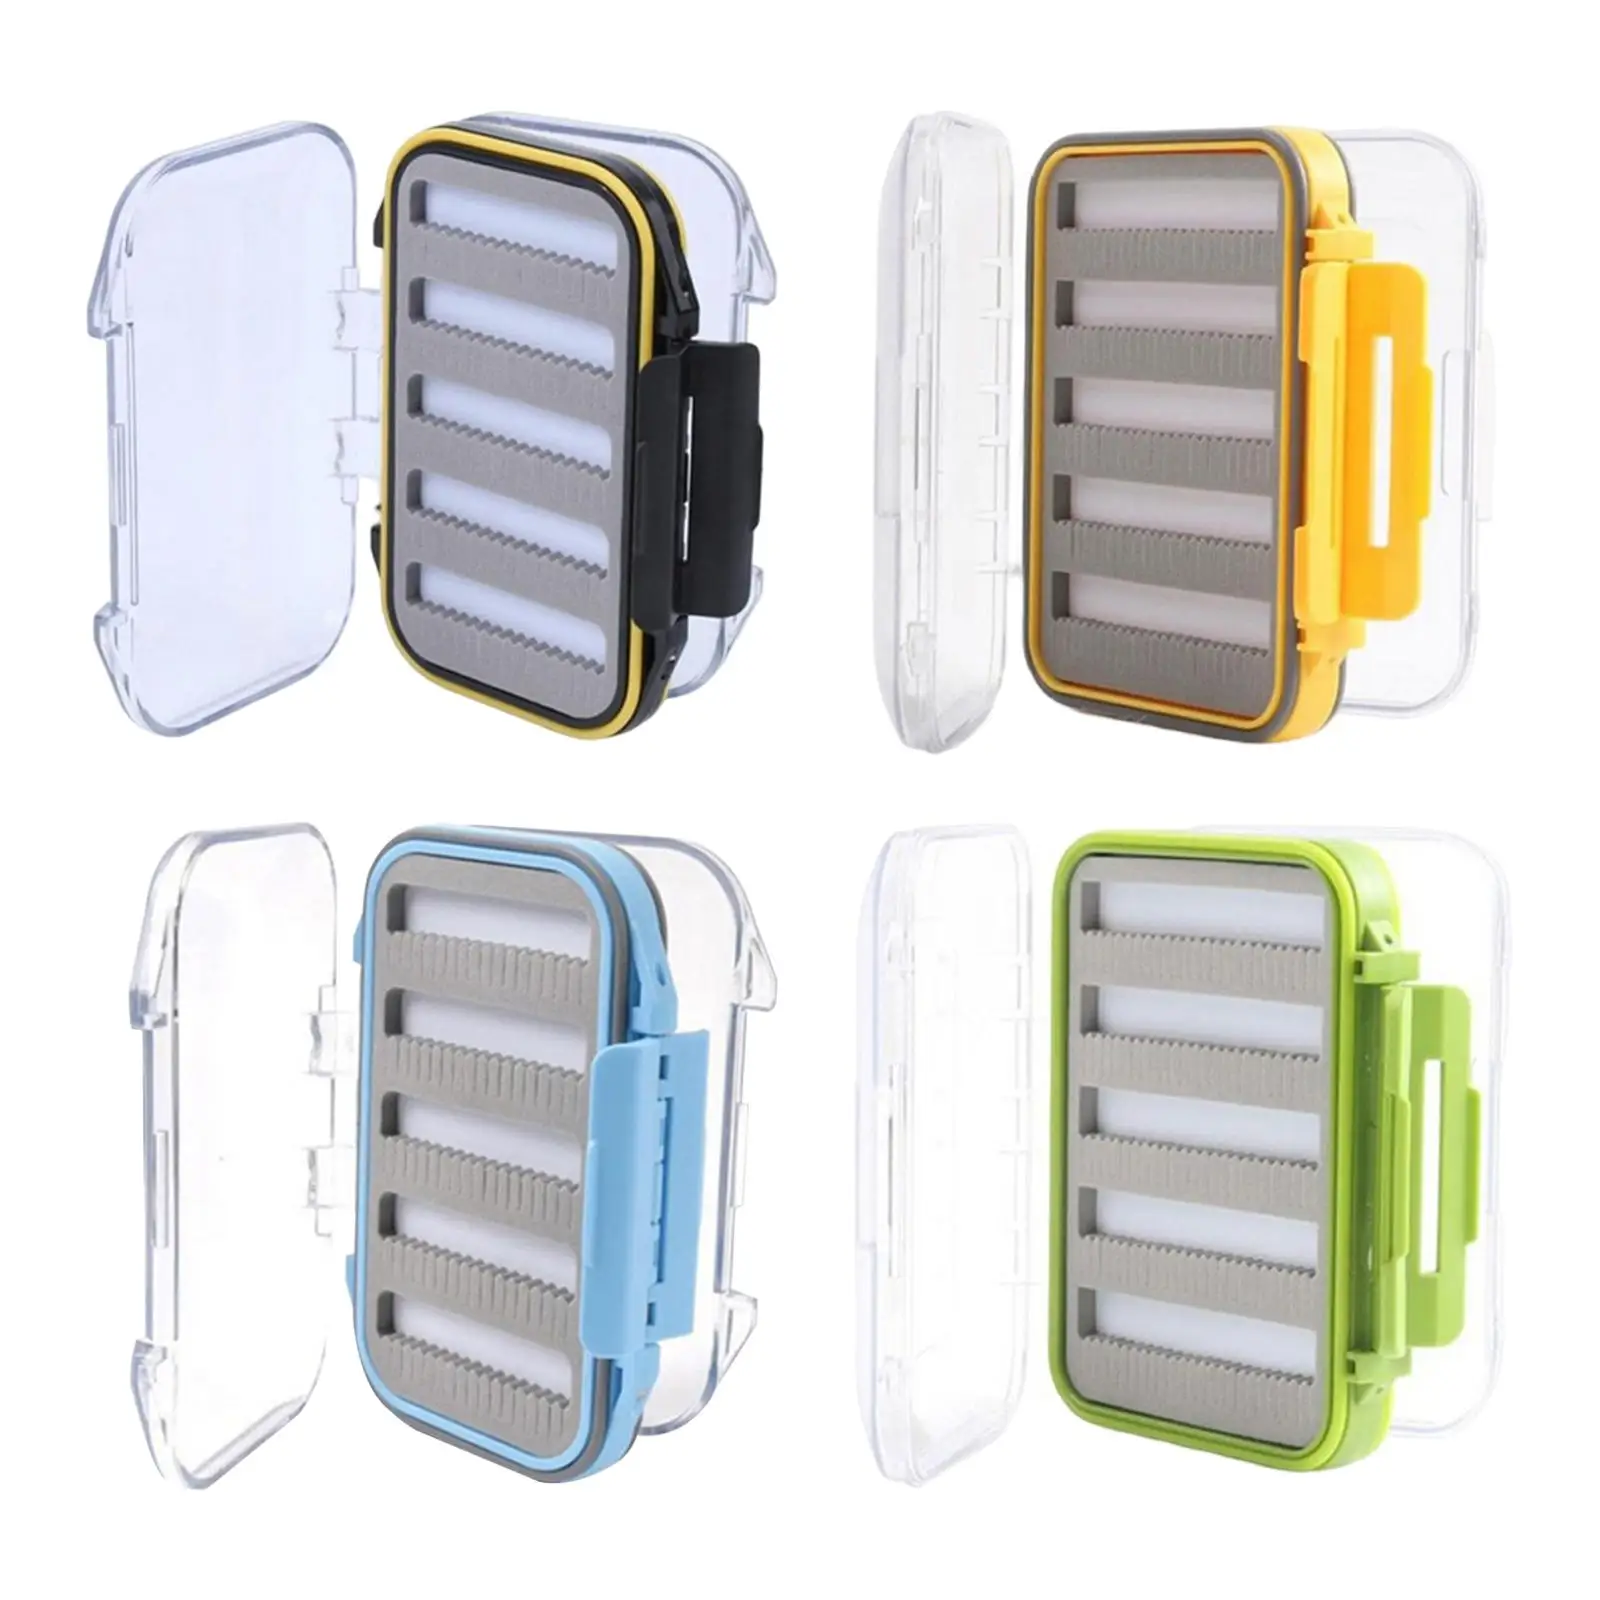 Waterproof Fly Fishing Box Case 3x1.3x4inch Easy Grip Two Sided Light Weight